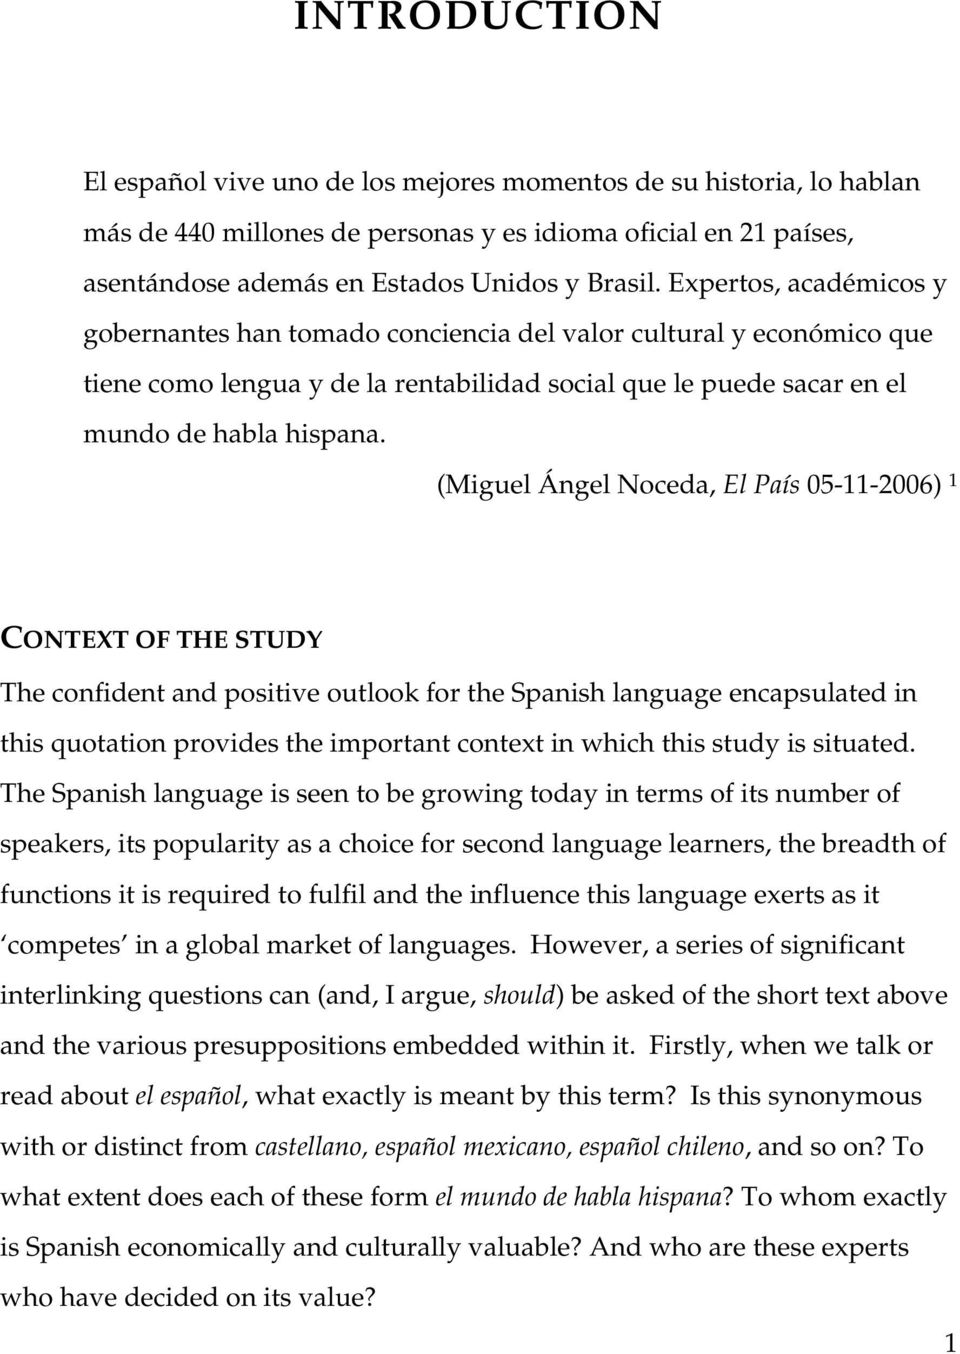 (Miguel Ángel Noceda, El País 05-11-2006) 1 CONTEXT OF THE STUDY The confident and positive outlook for the Spanish language encapsulated in this quotation provides the important context in which